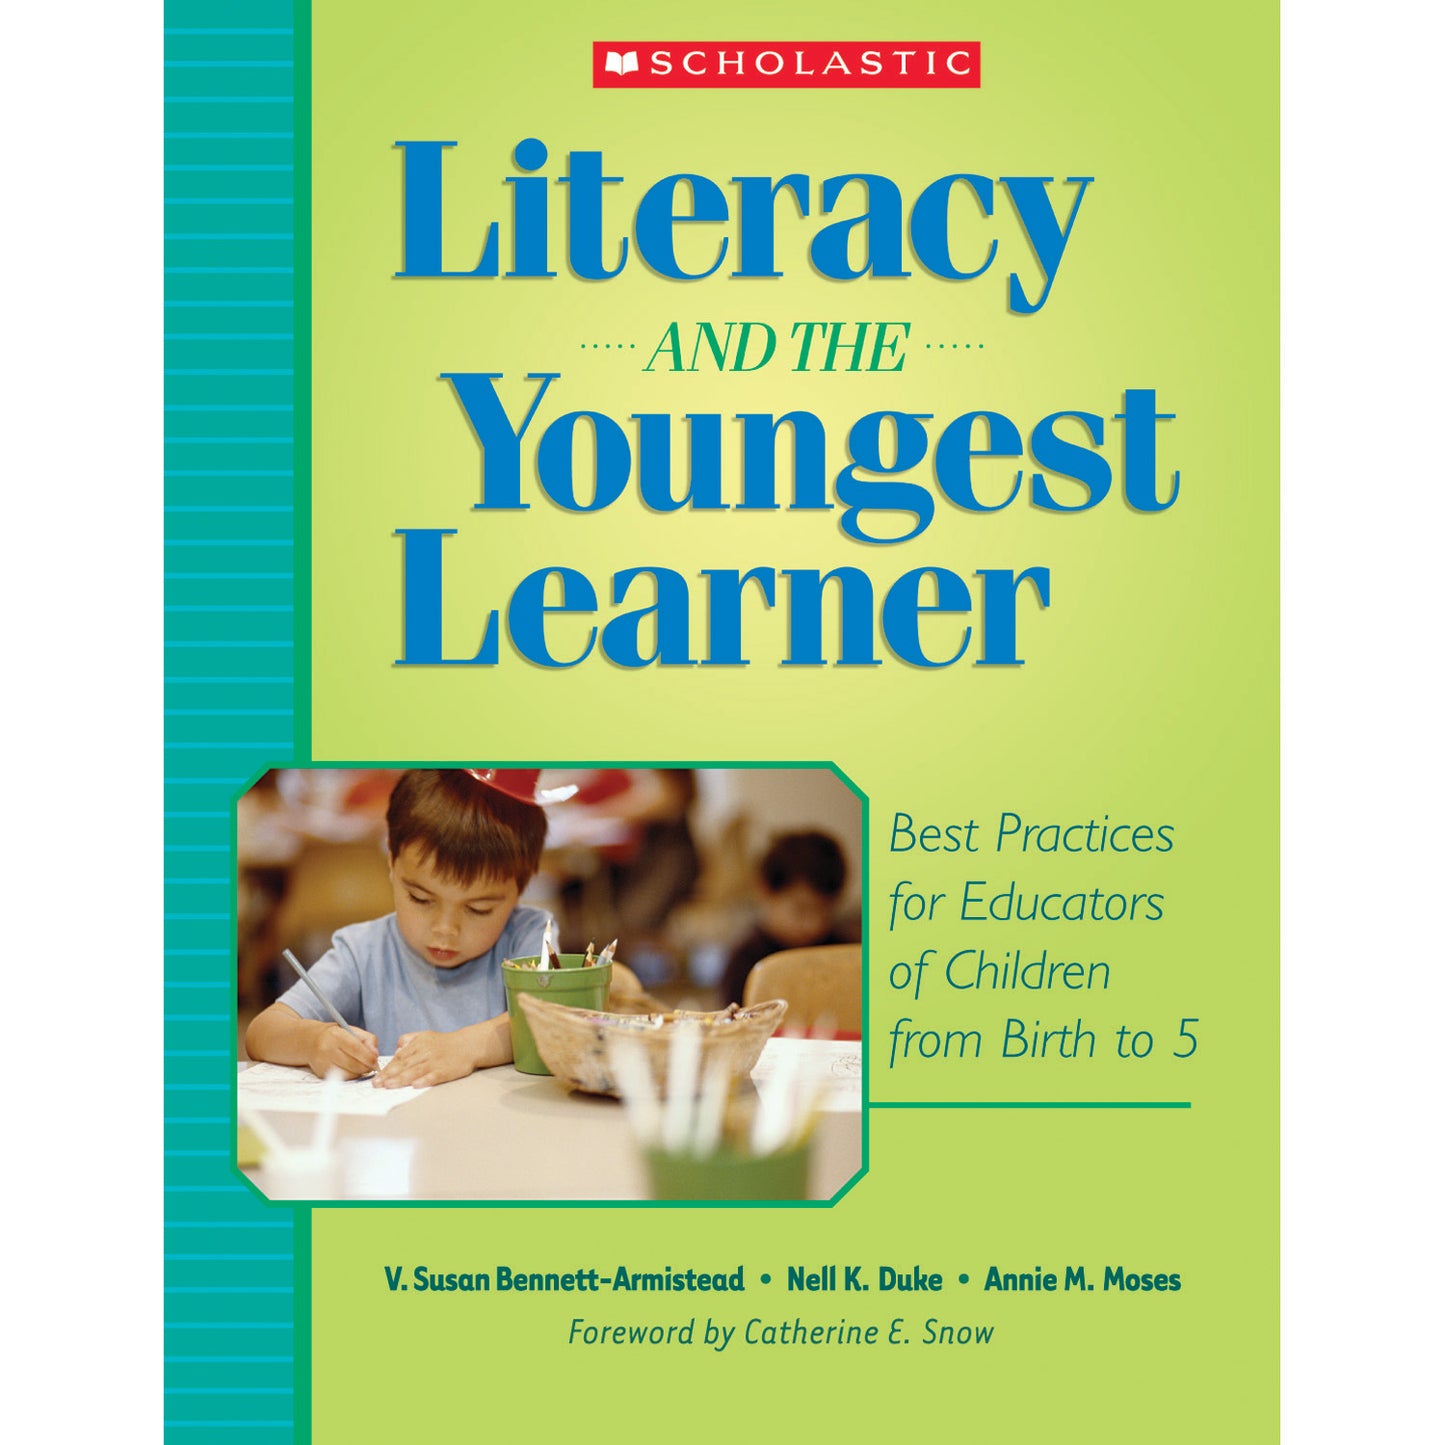 Literacy and the Youngest Learner